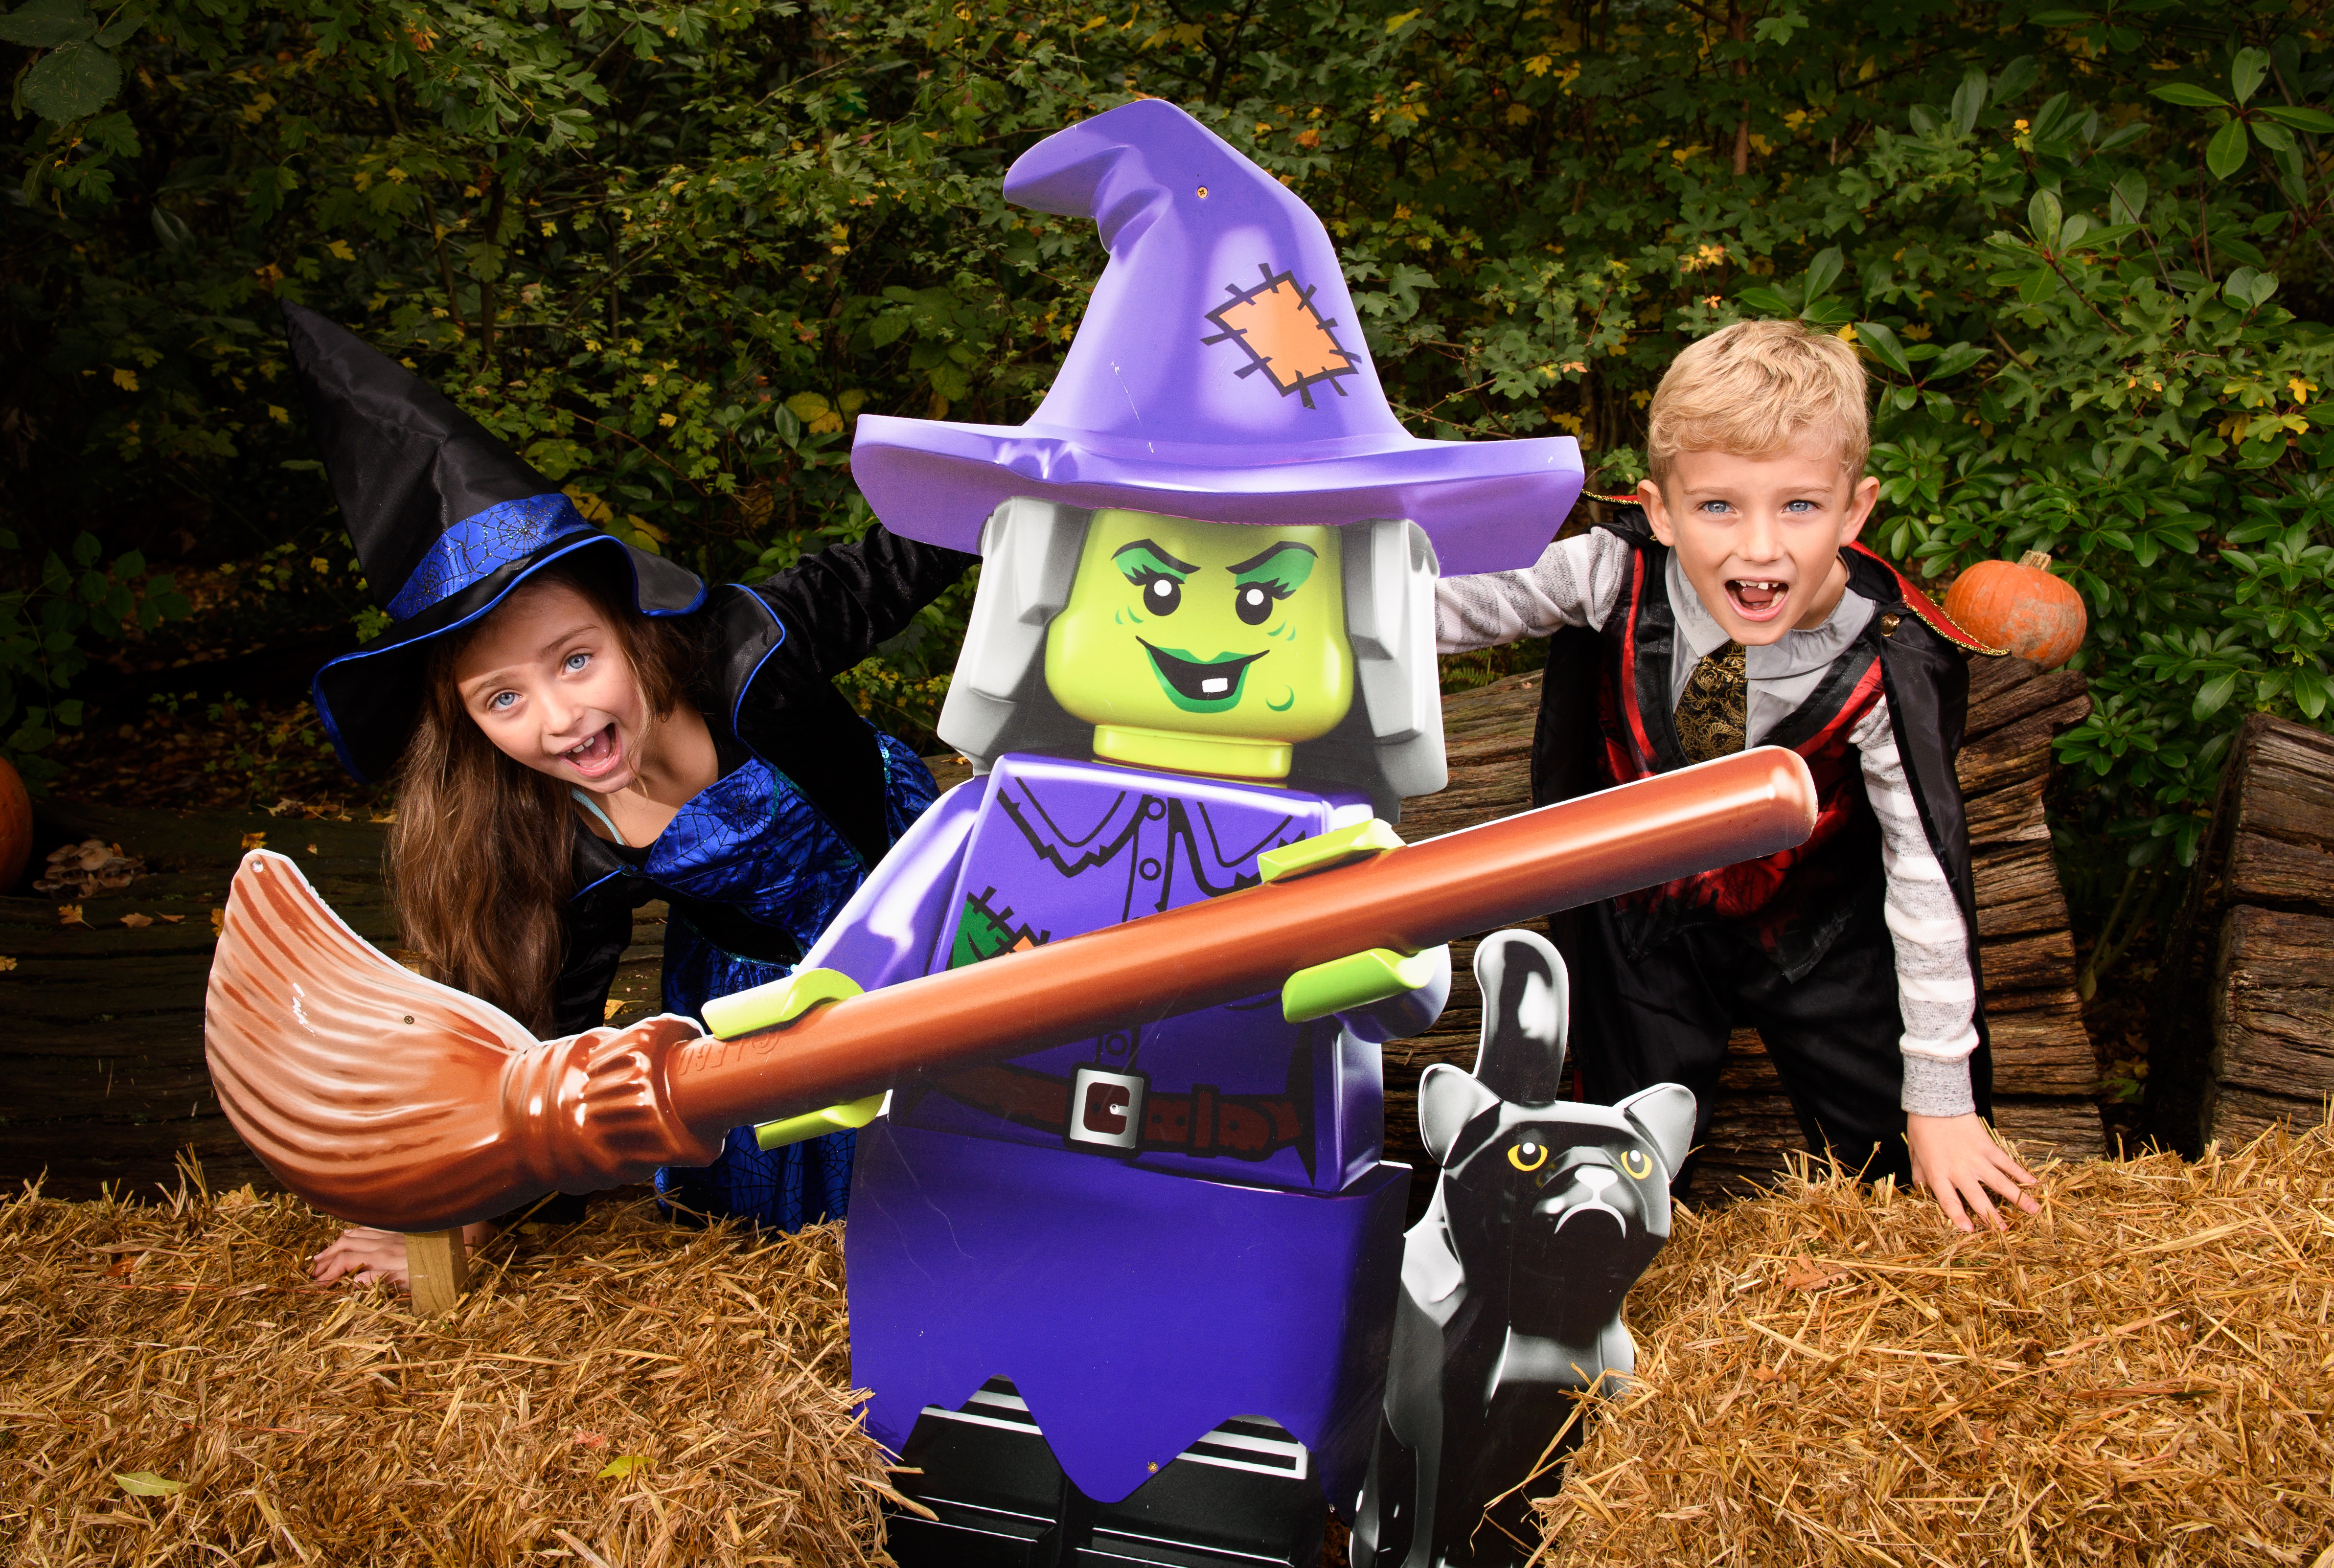 Children in Halloween costumes during Brick or Treat at the LEGOLAND Windsor Resort